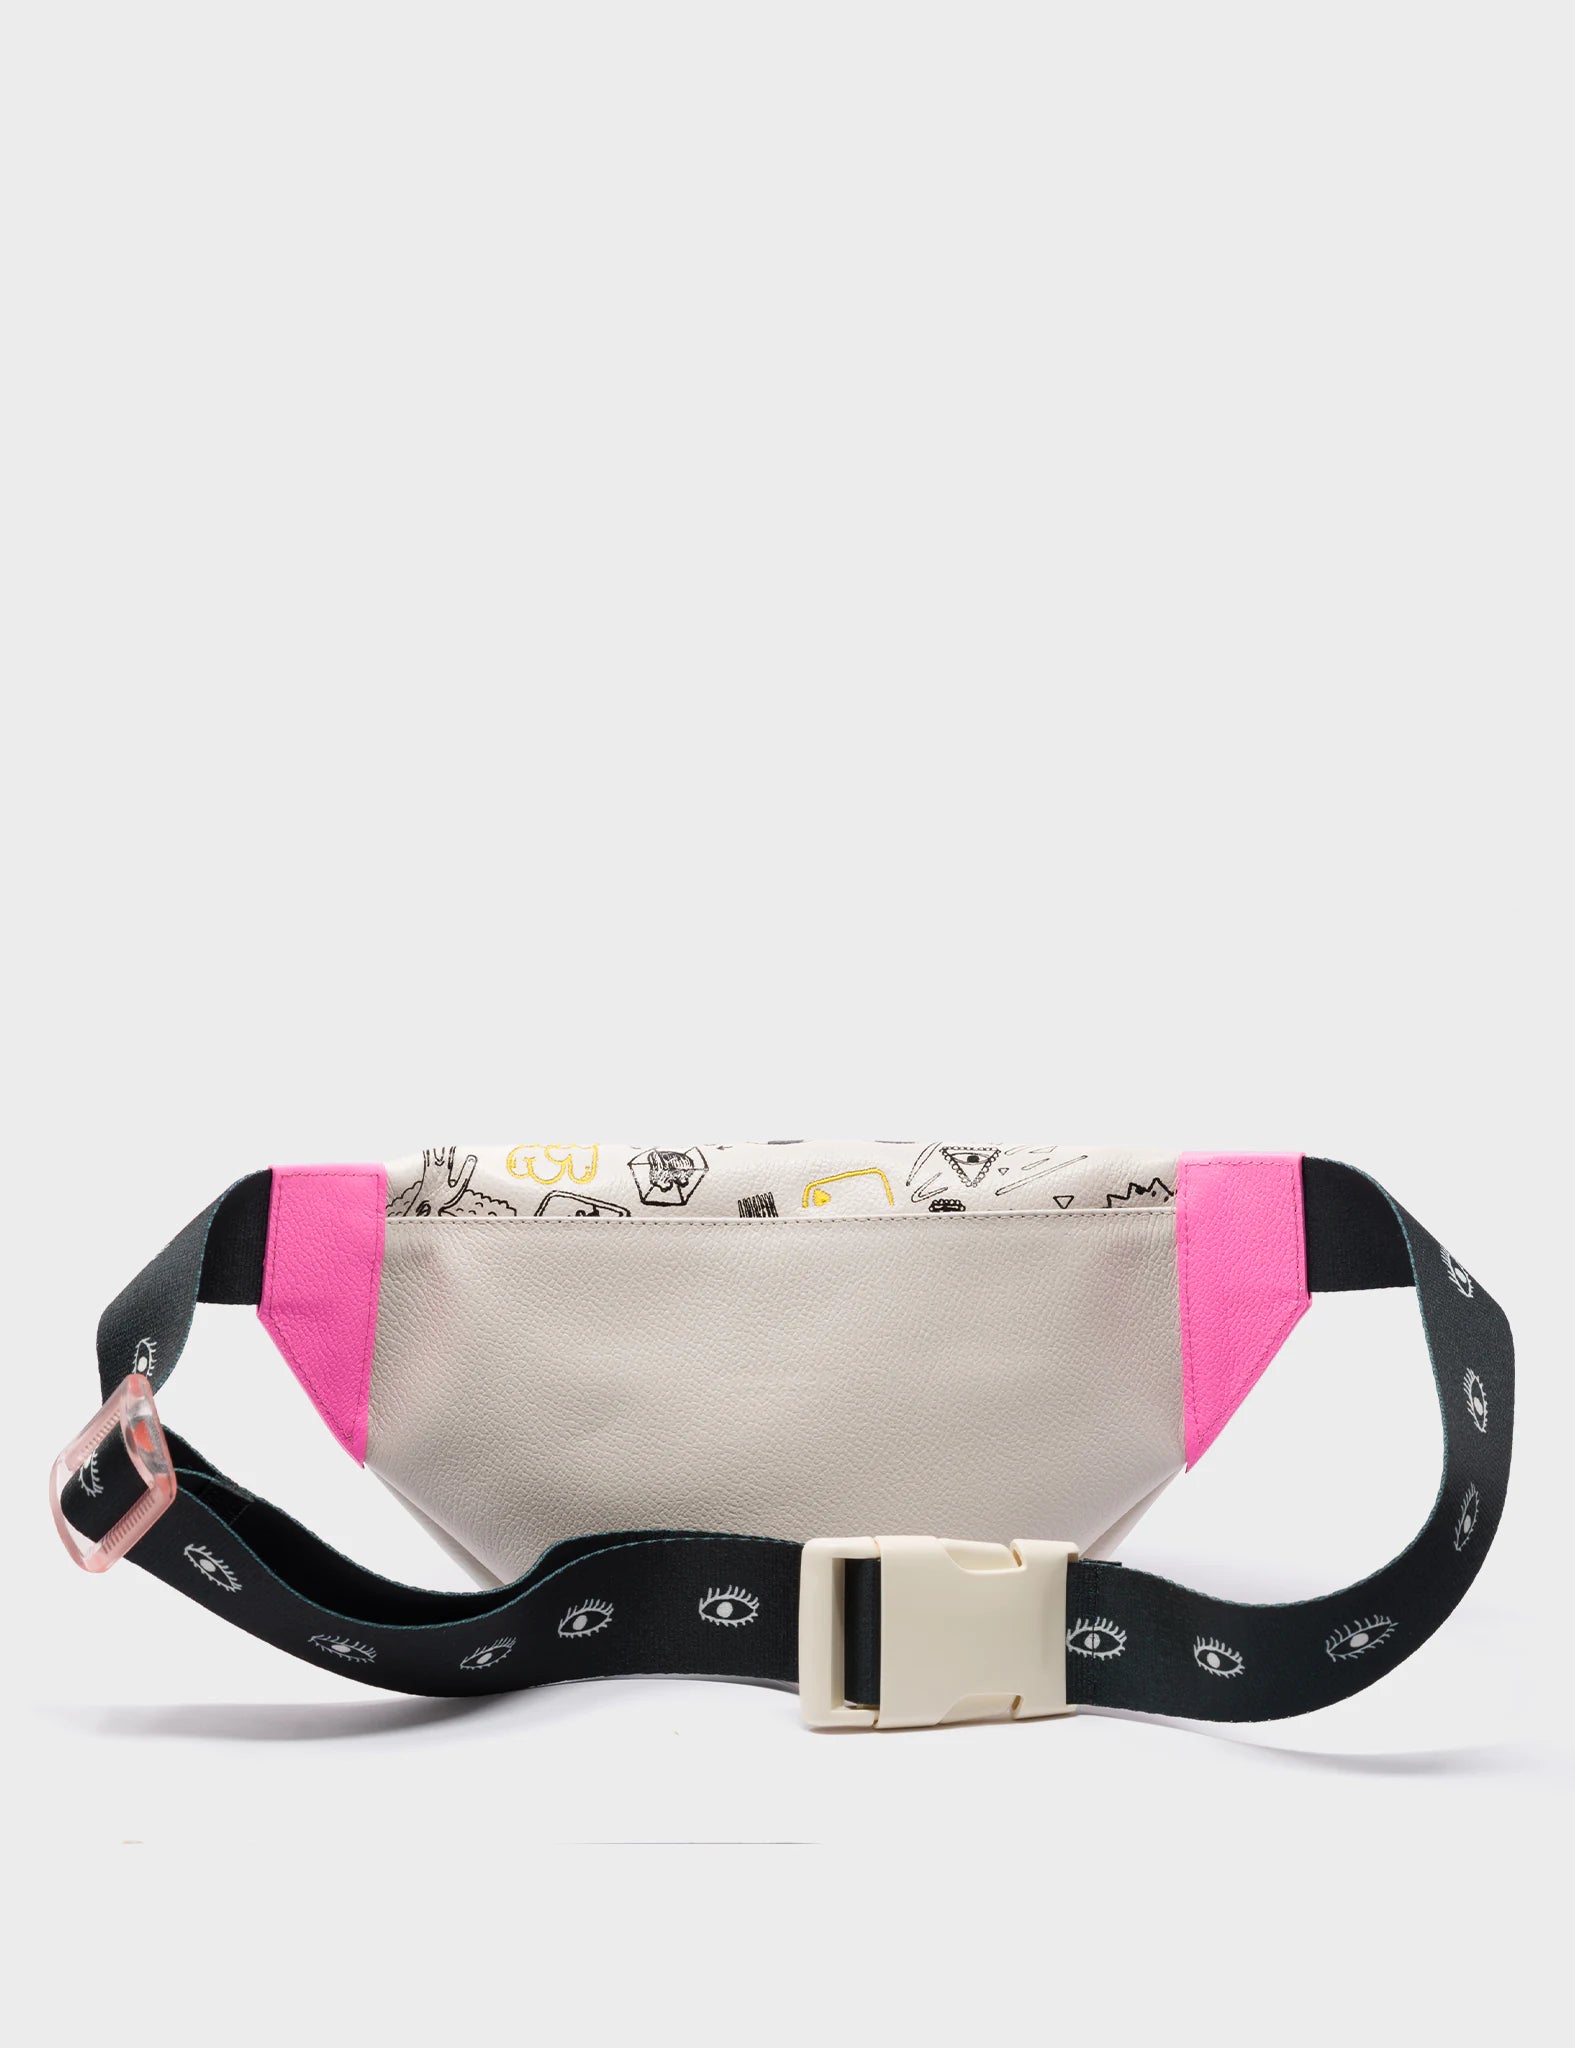 Harold Fanny Pack Cream Leather - Urban Doodles Embroidery - Back View